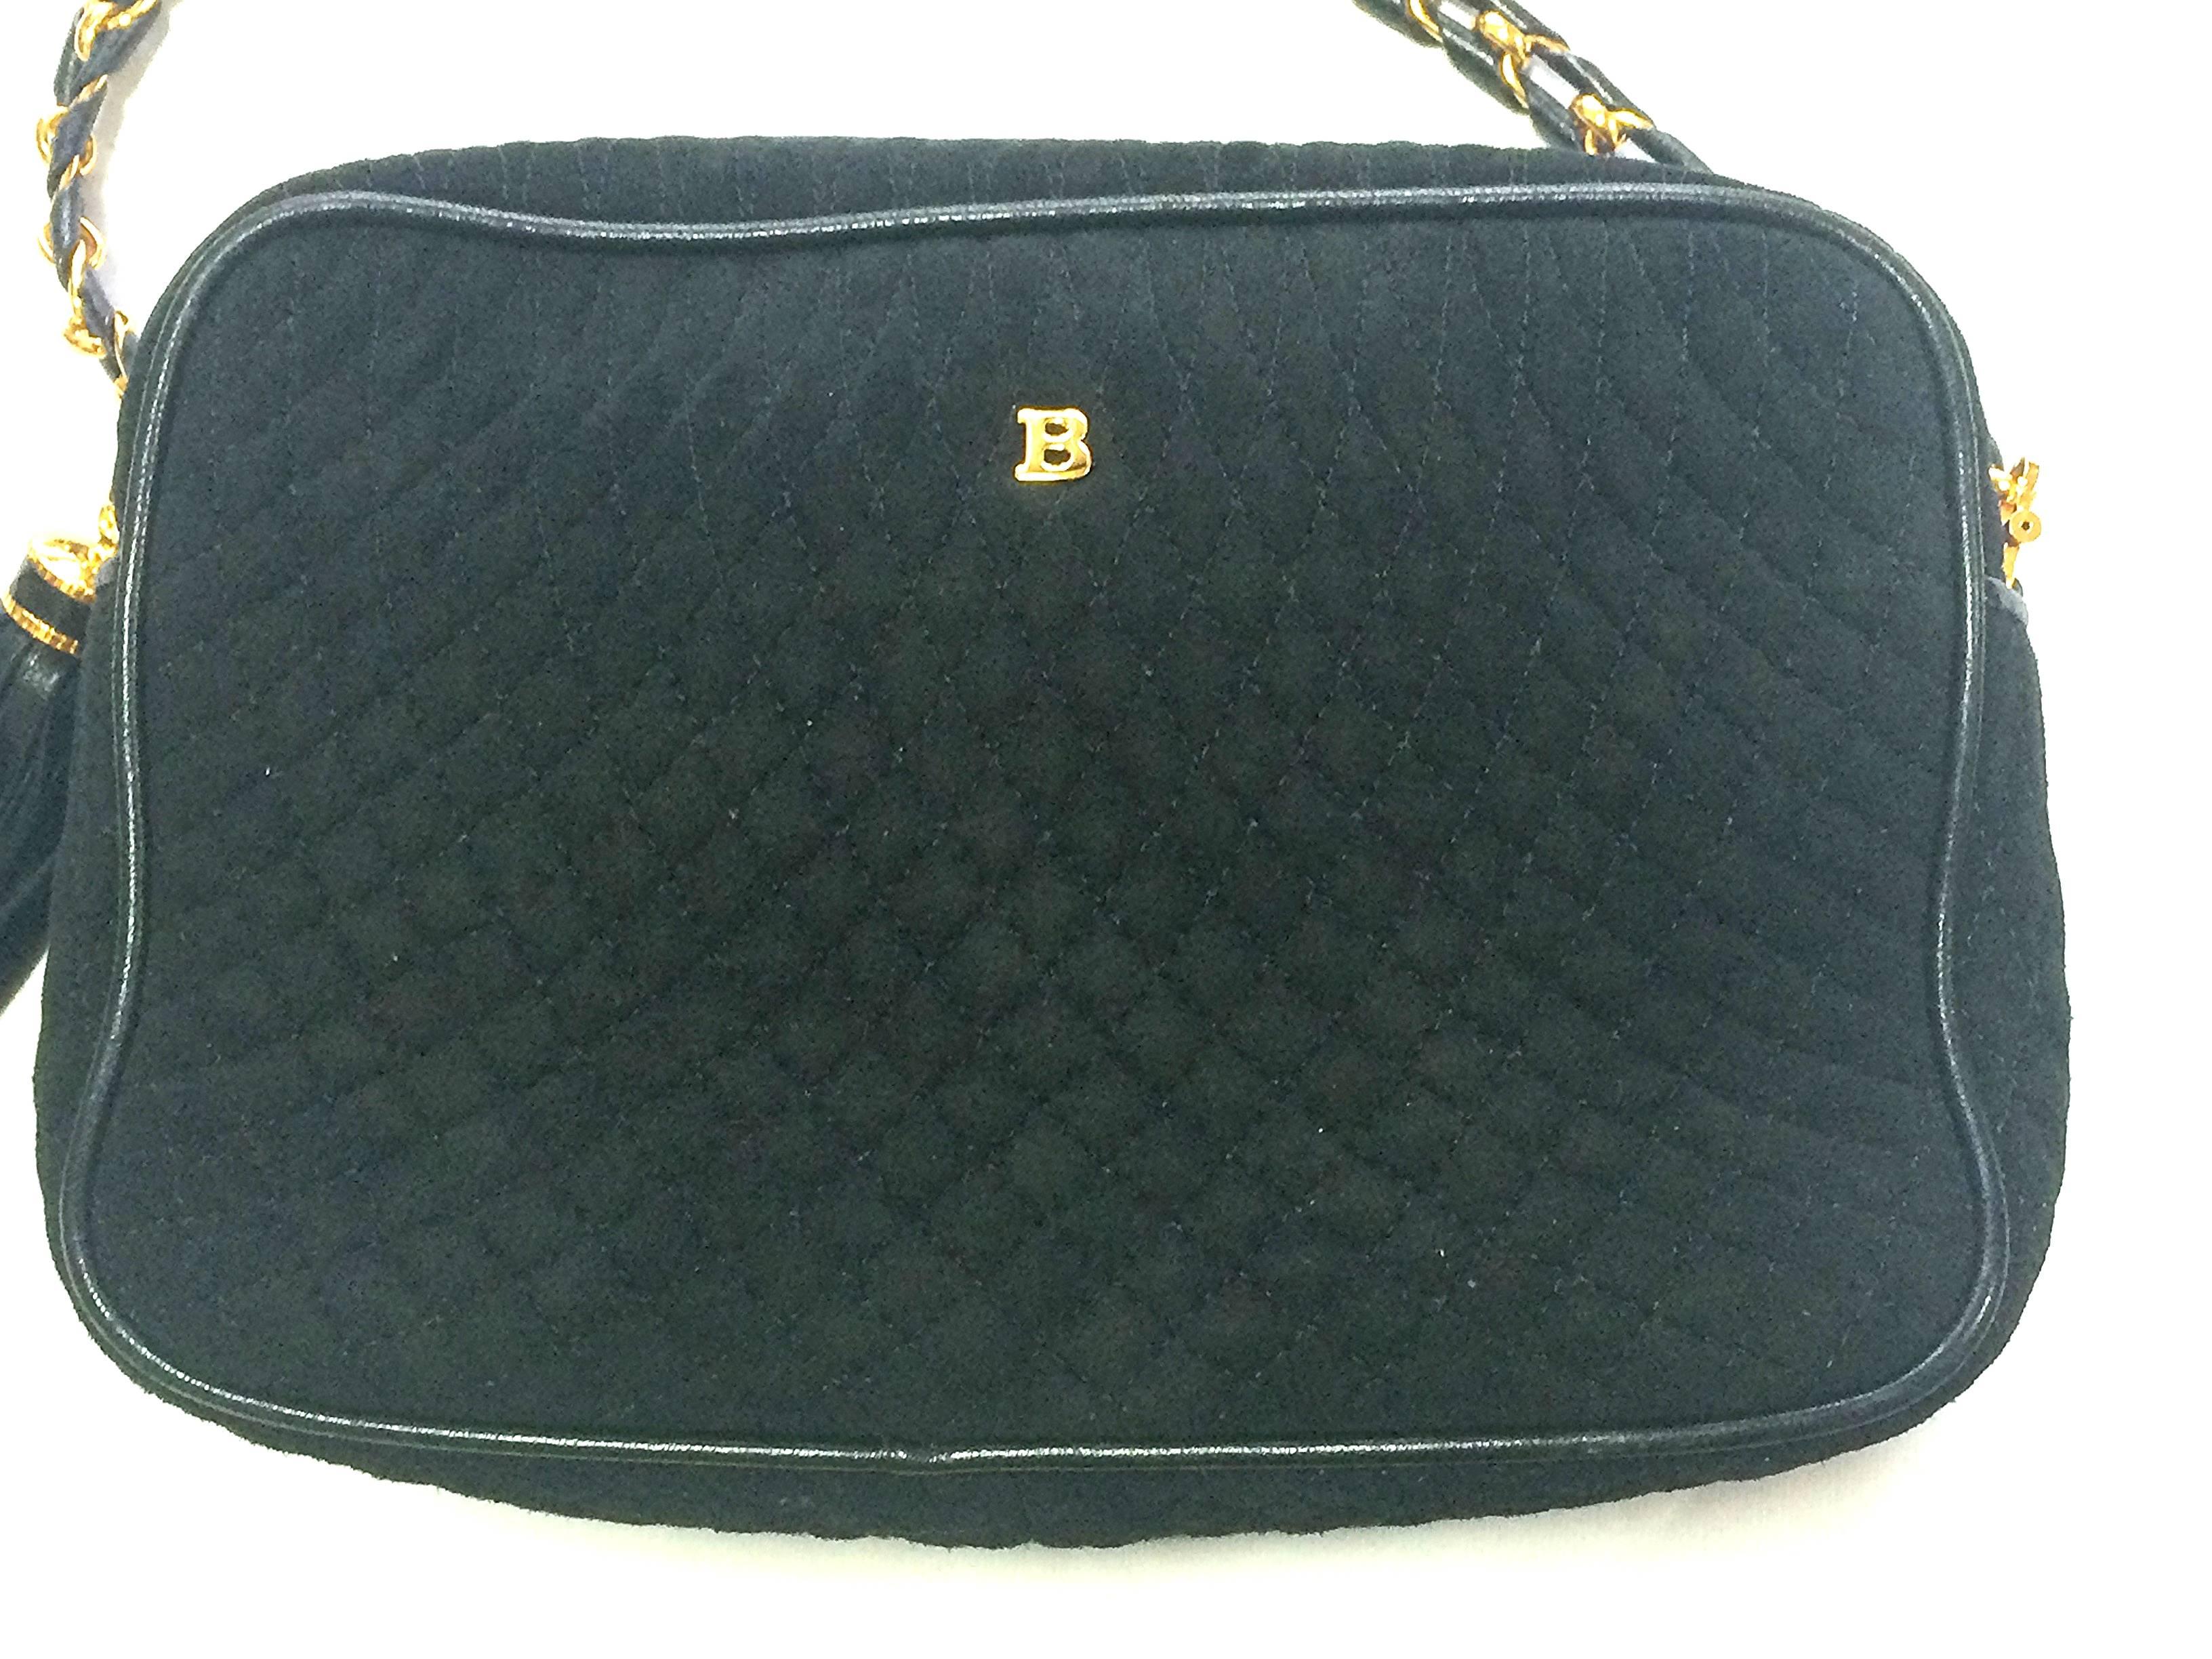 1990s. Vintage BALLY genuine black suede leather quilted shoulder camera bag with fringe and gold tone chain strap.

This is a vintage Bally genuine suede leather quilted shoulder bag back in the old Bally collection.
It has a gold 